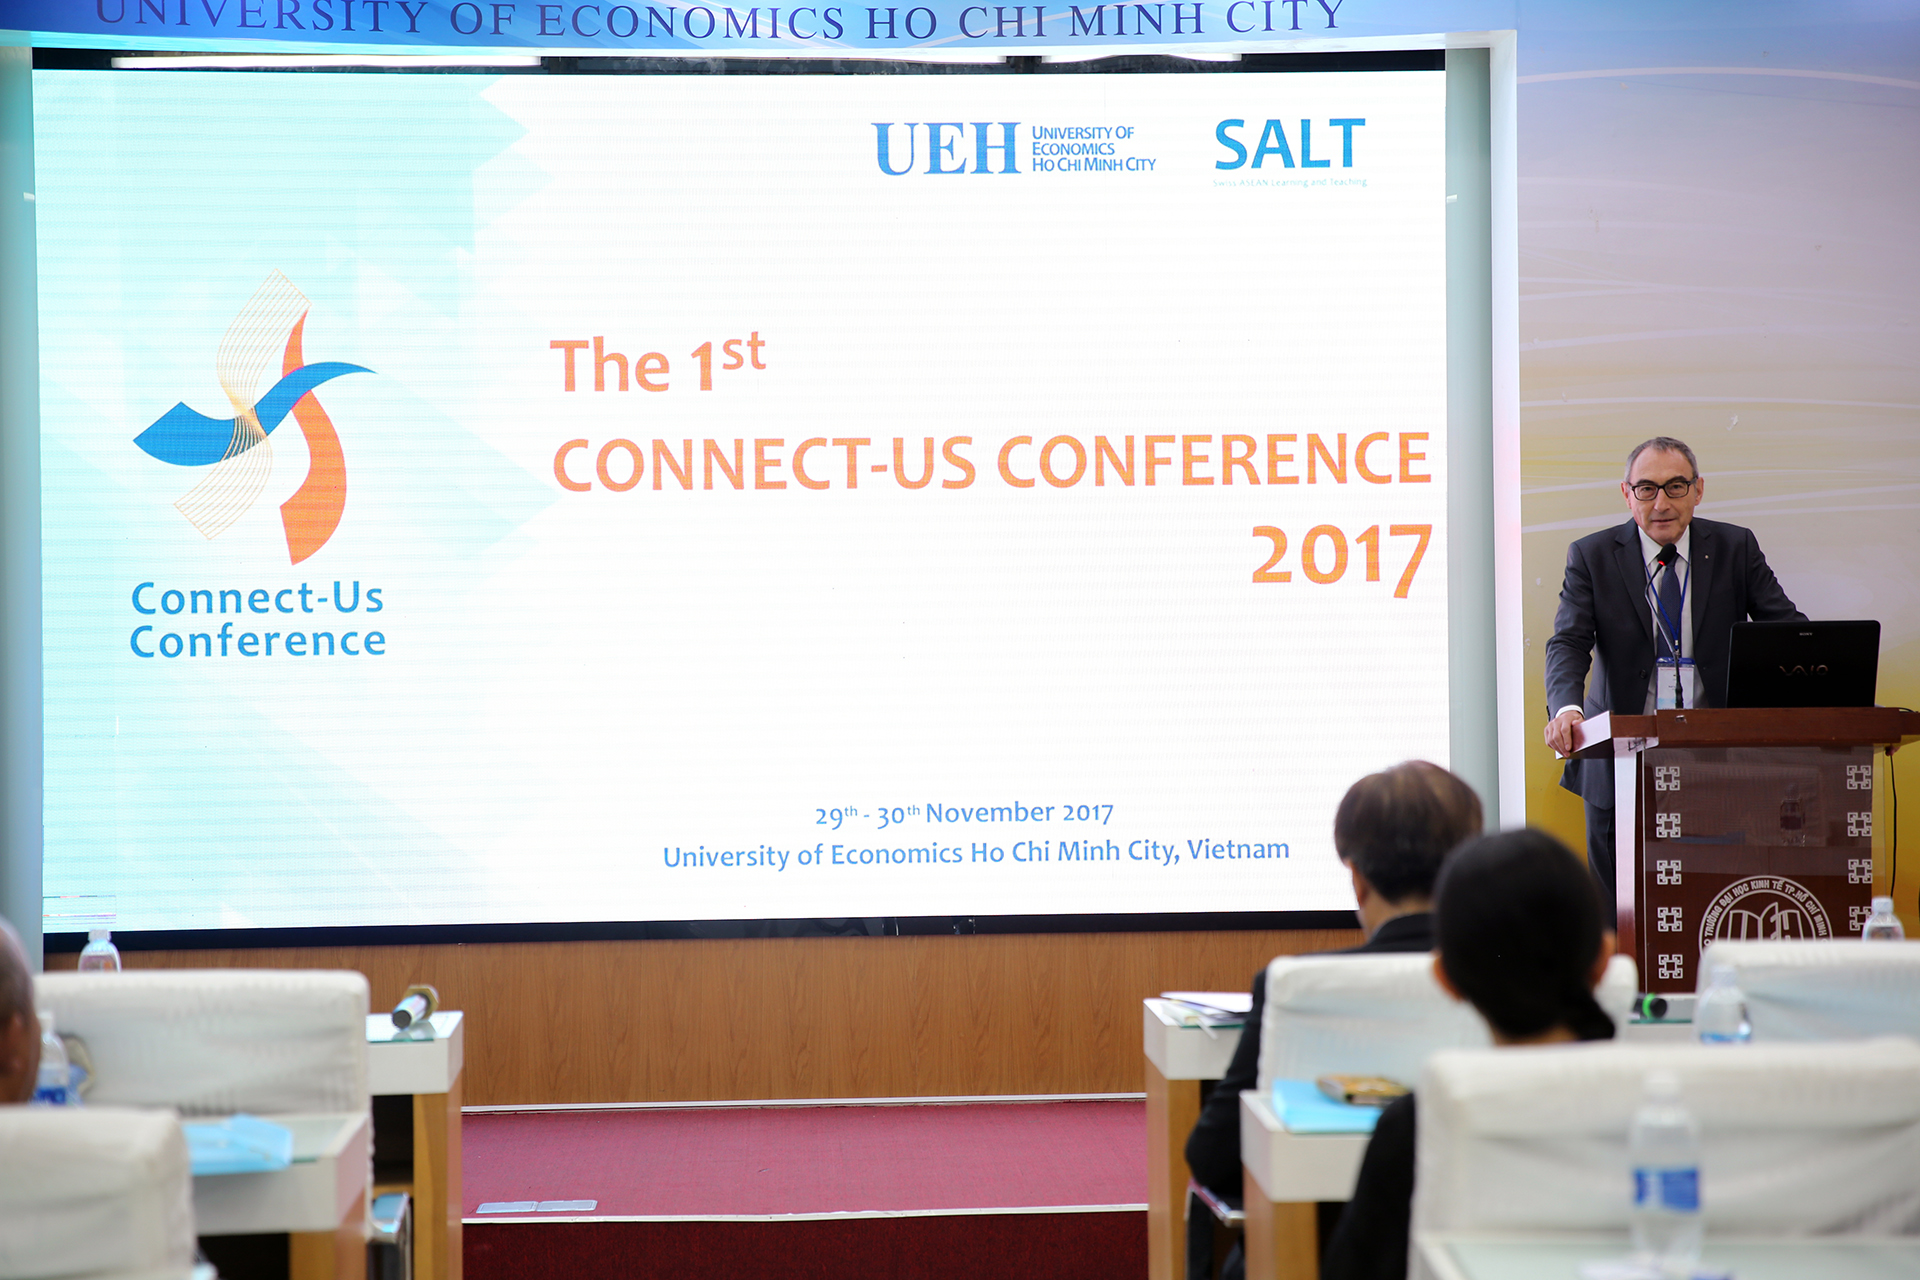 The 1st Connect-Us Conference 2017 (CuC) in Vietnam